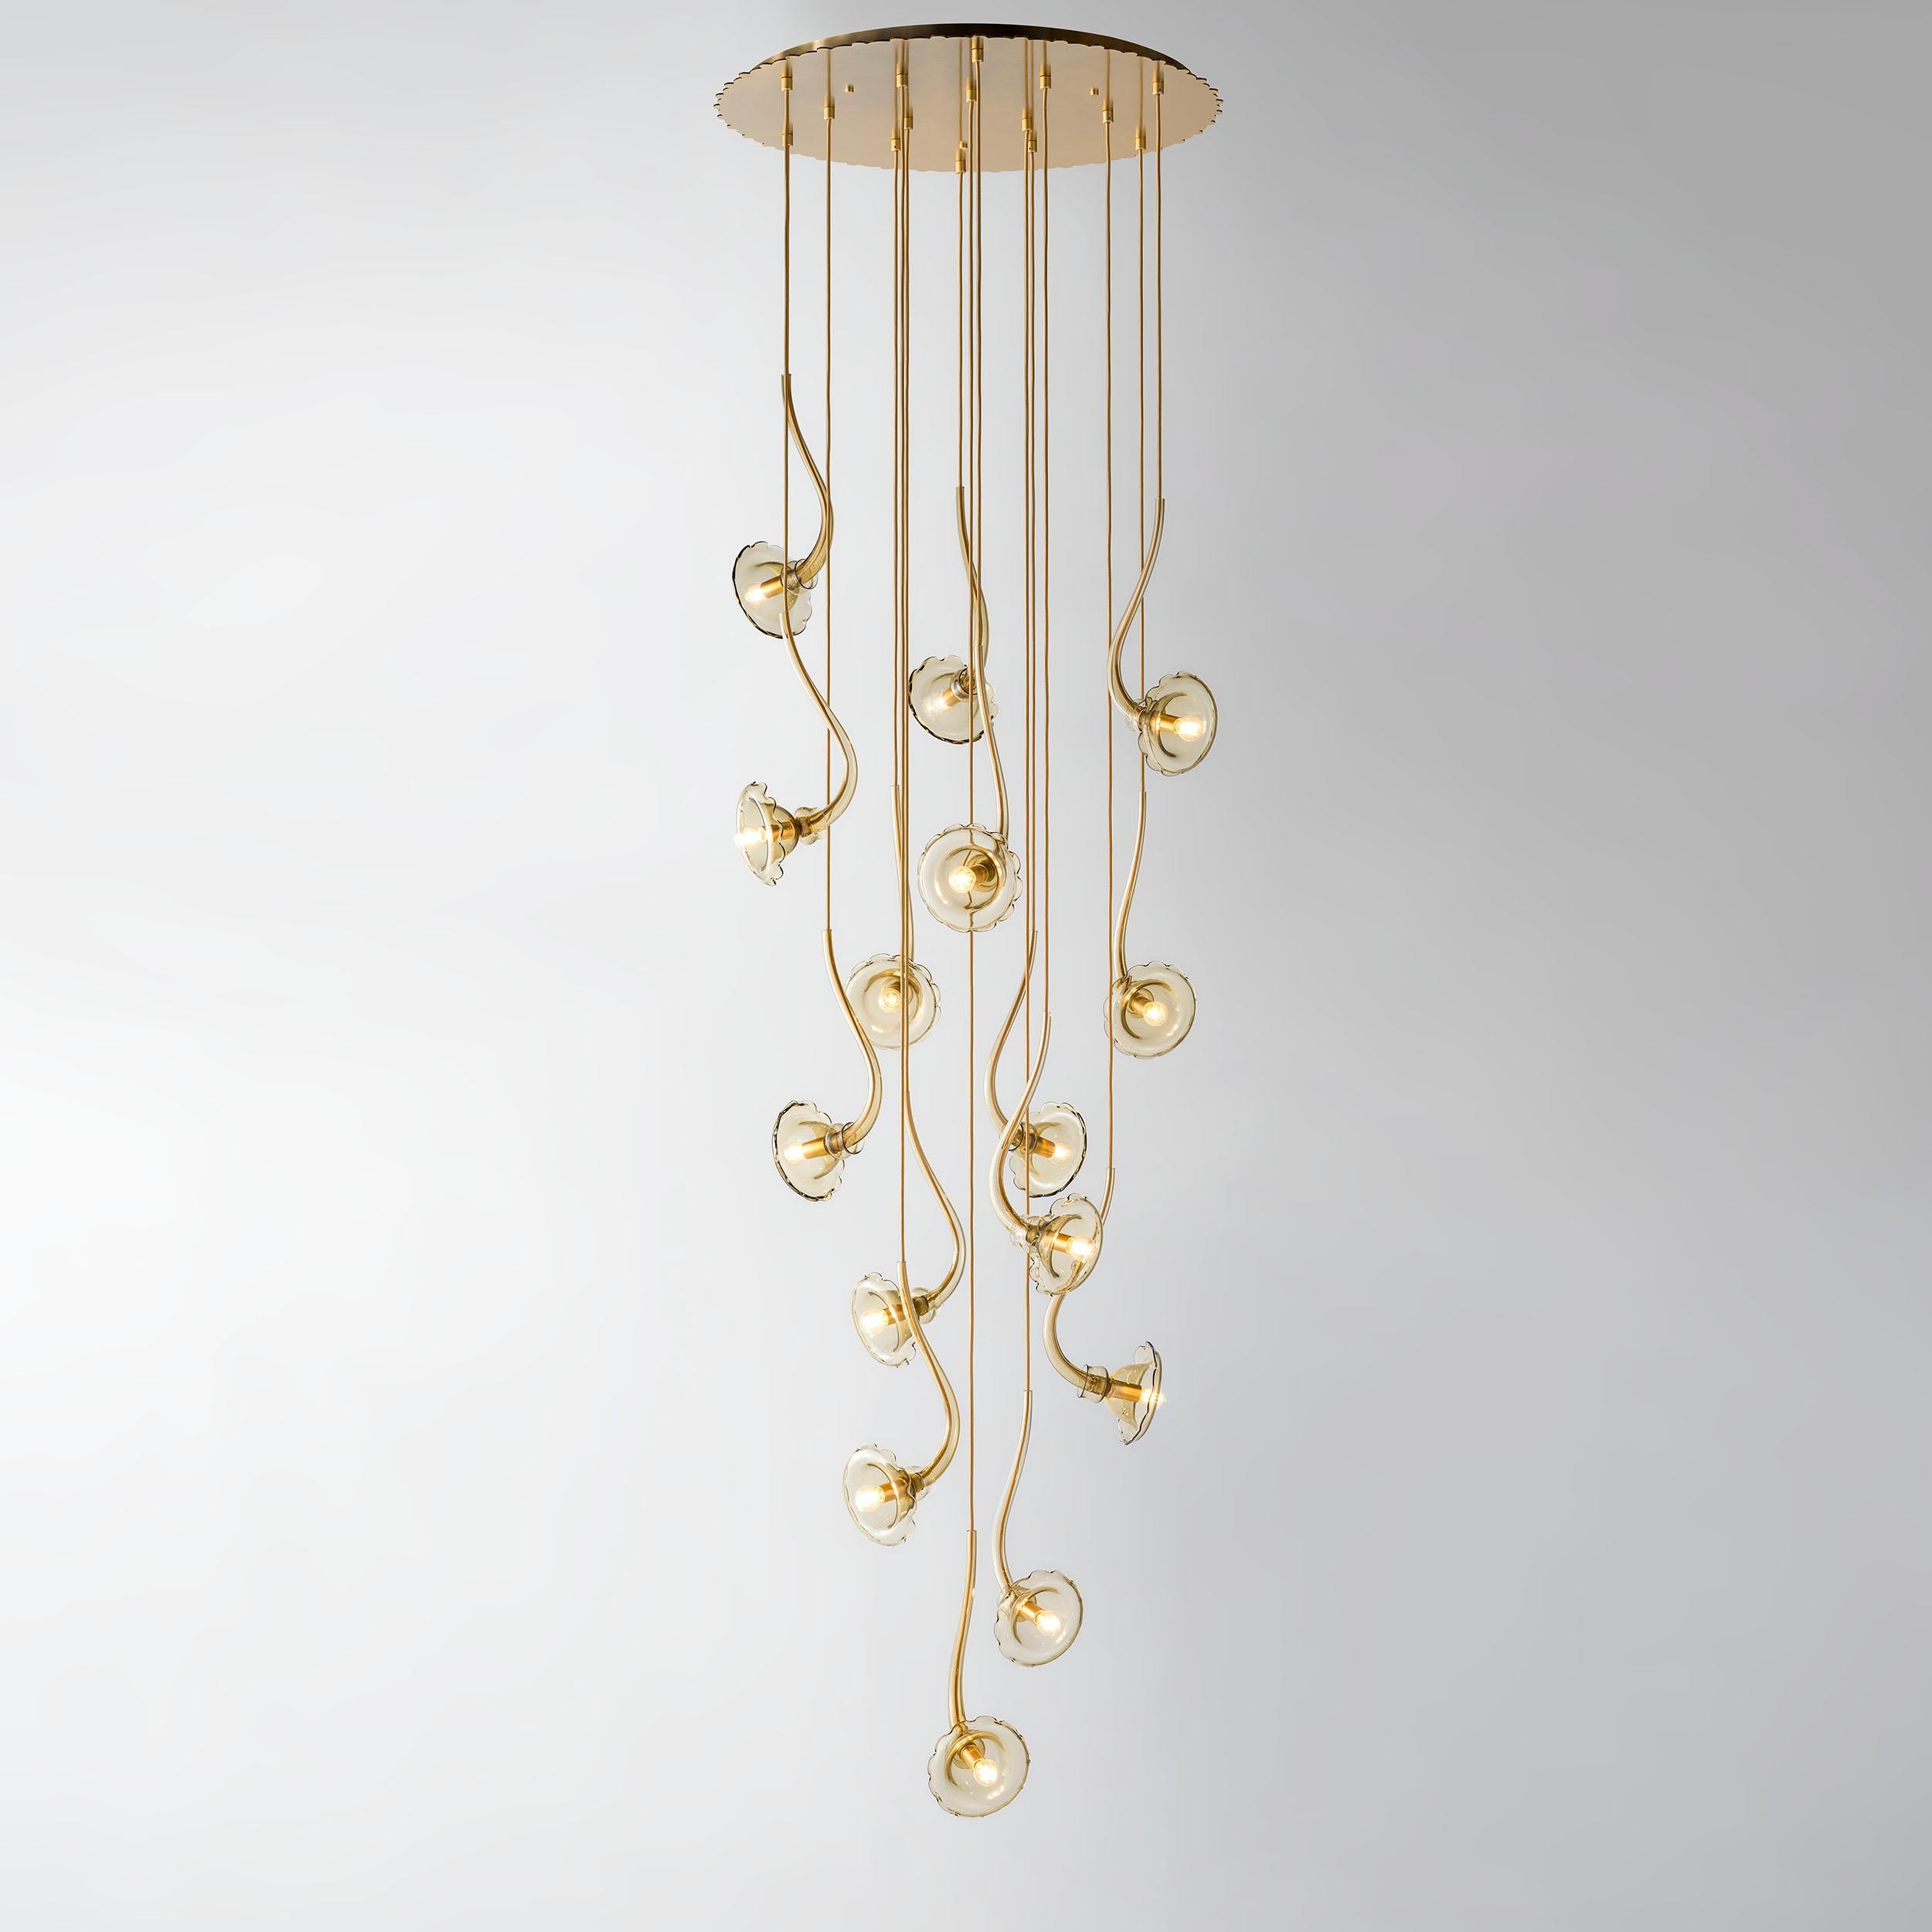 Chandelier composed of 15 pagliesque glass chalices with a brushed gold structure. Floral-inspired composition, glass blown and handcrafted by skilled Venetian craftsmen.

Ikebana design Romano Saccani Architetti Associati is a collection of